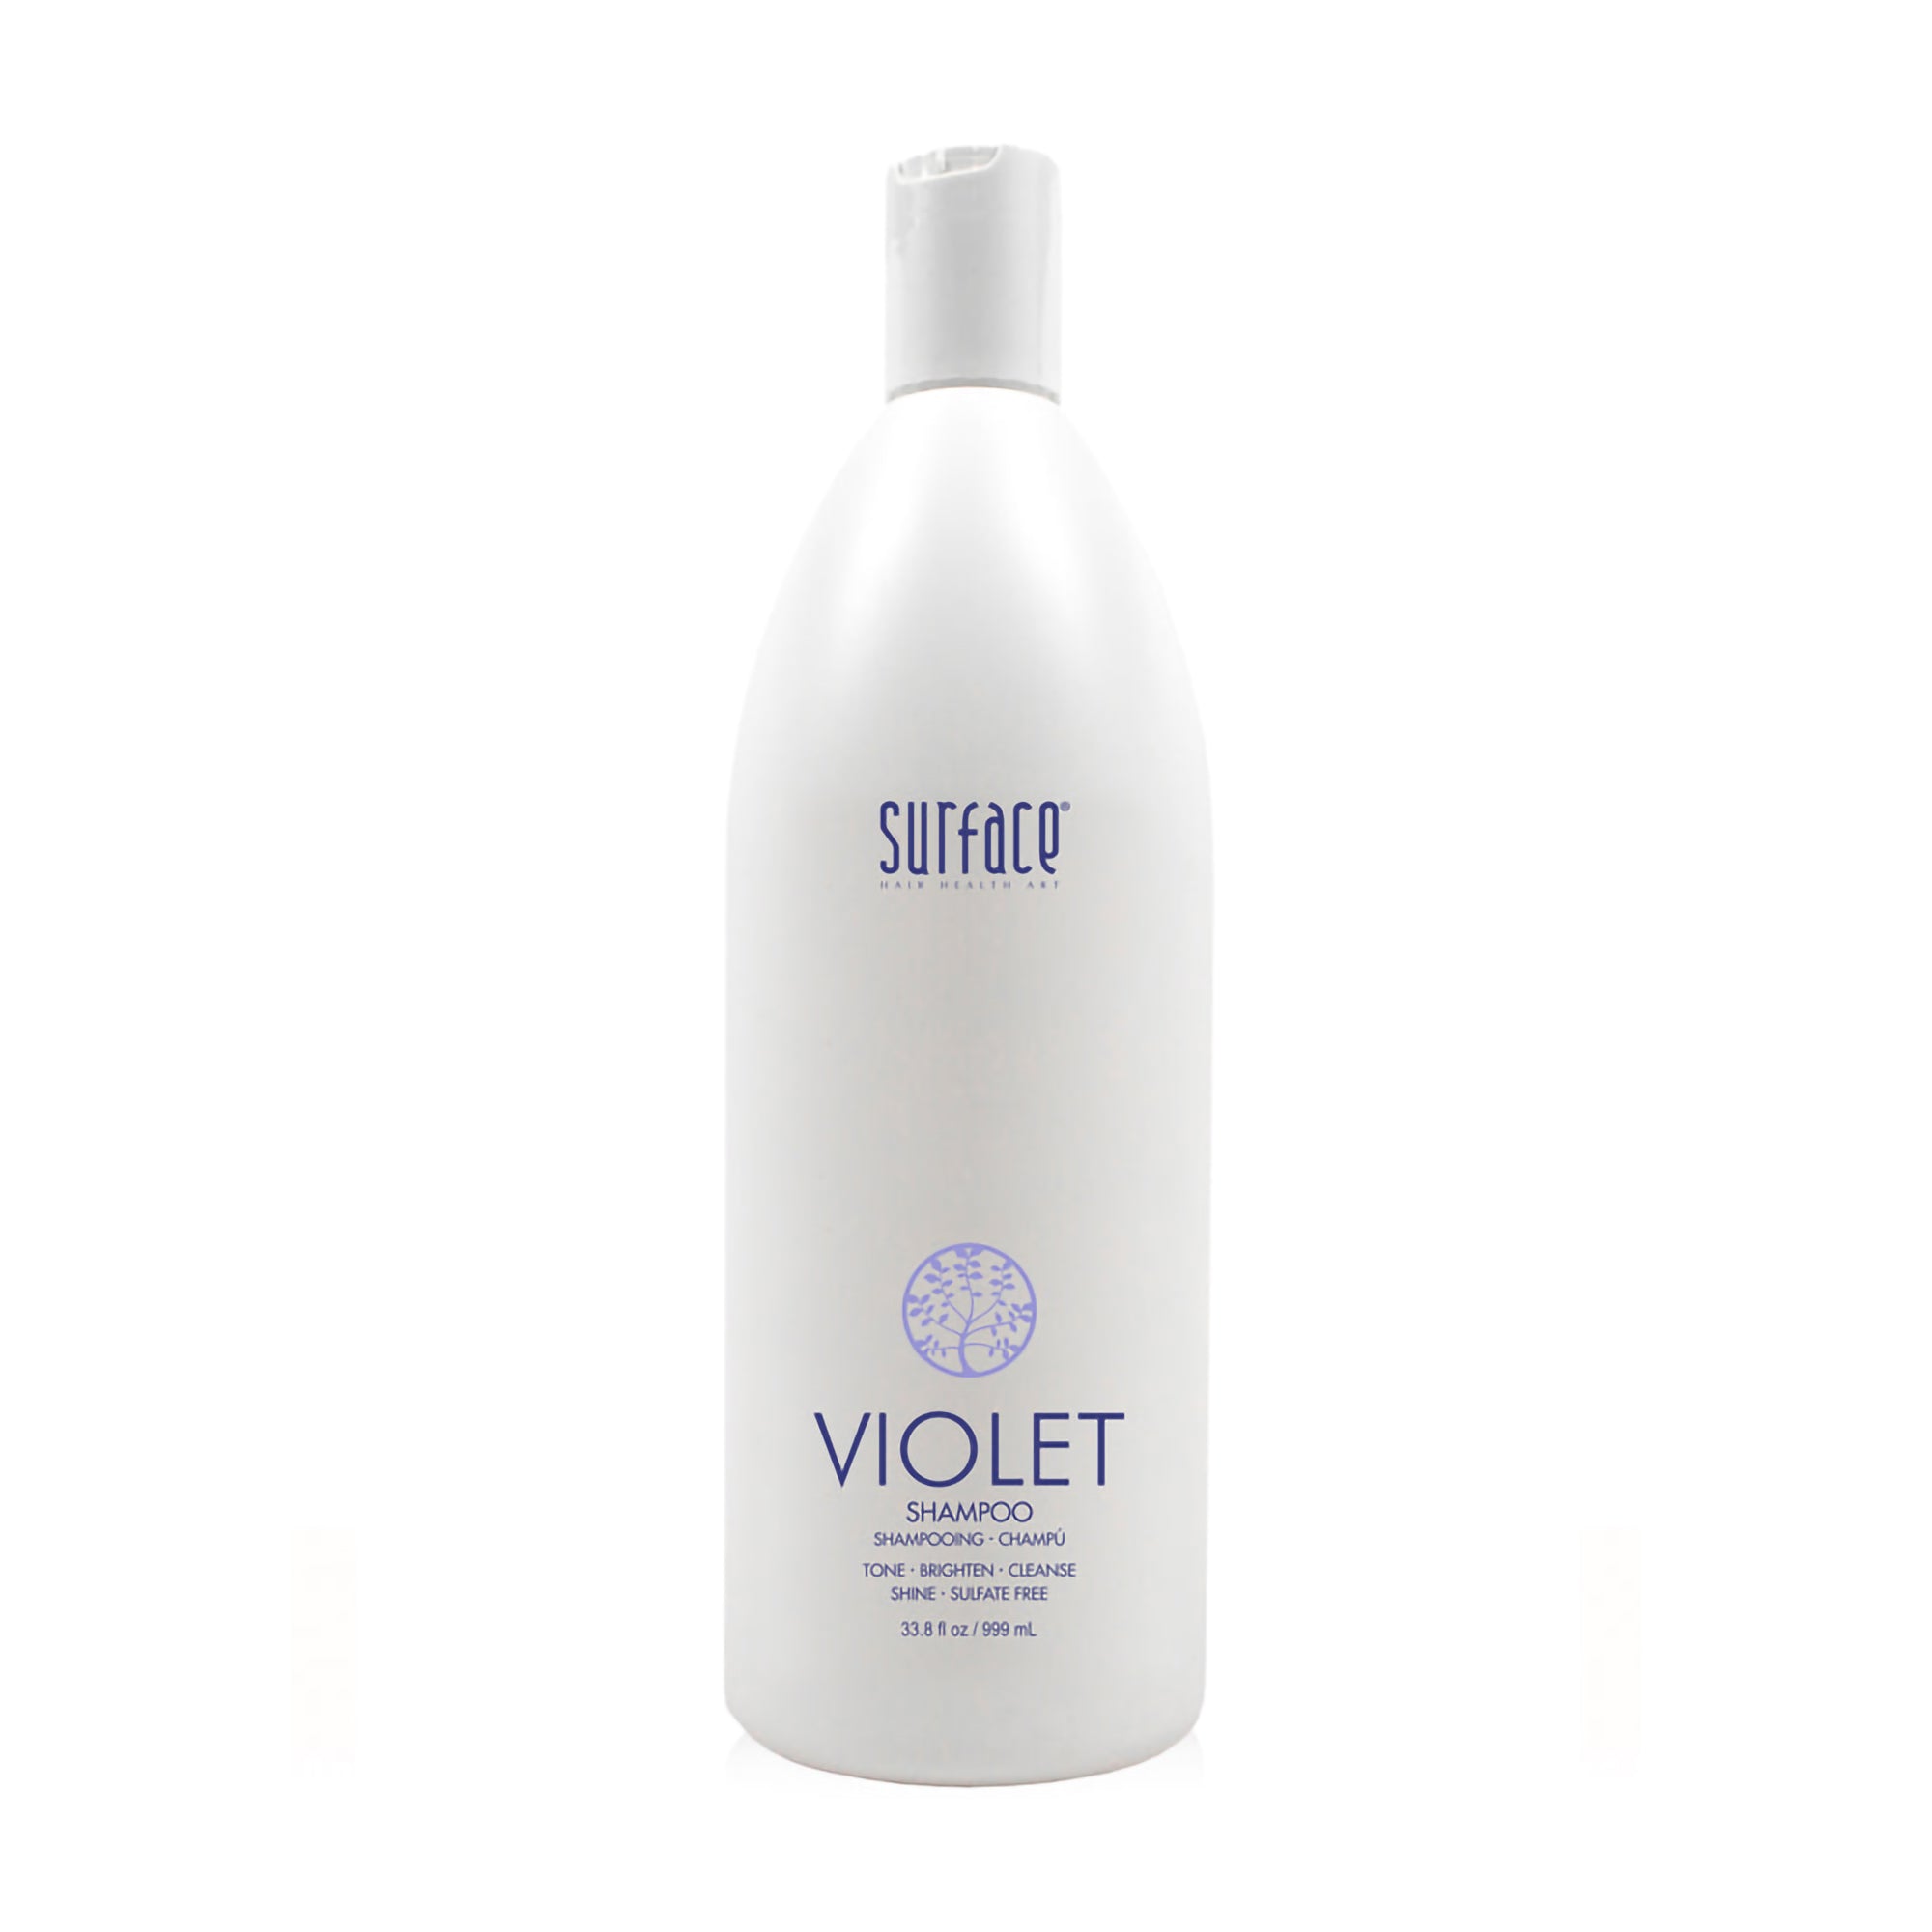 Surface Violet Shampoo and Conditioner Liter Duo / LITER